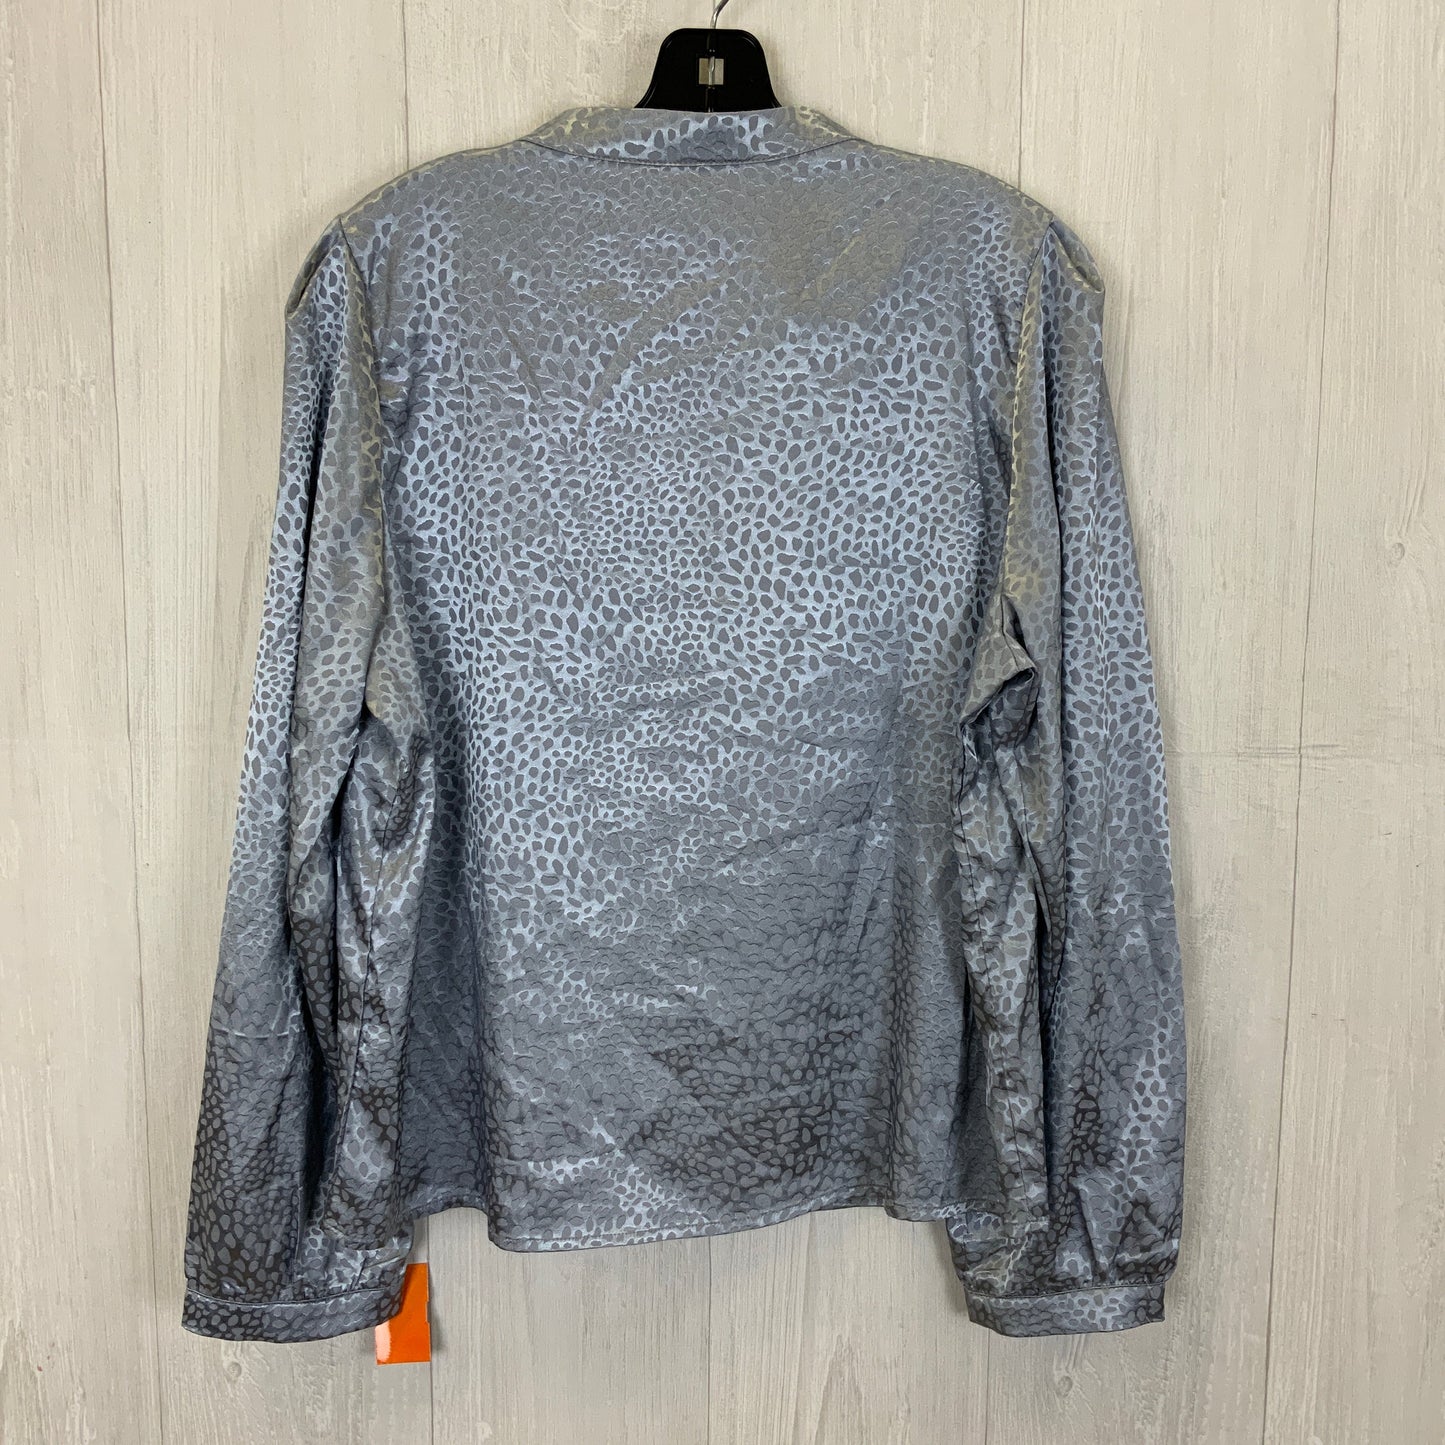 Blouse Long Sleeve By Shein  Size: Xl